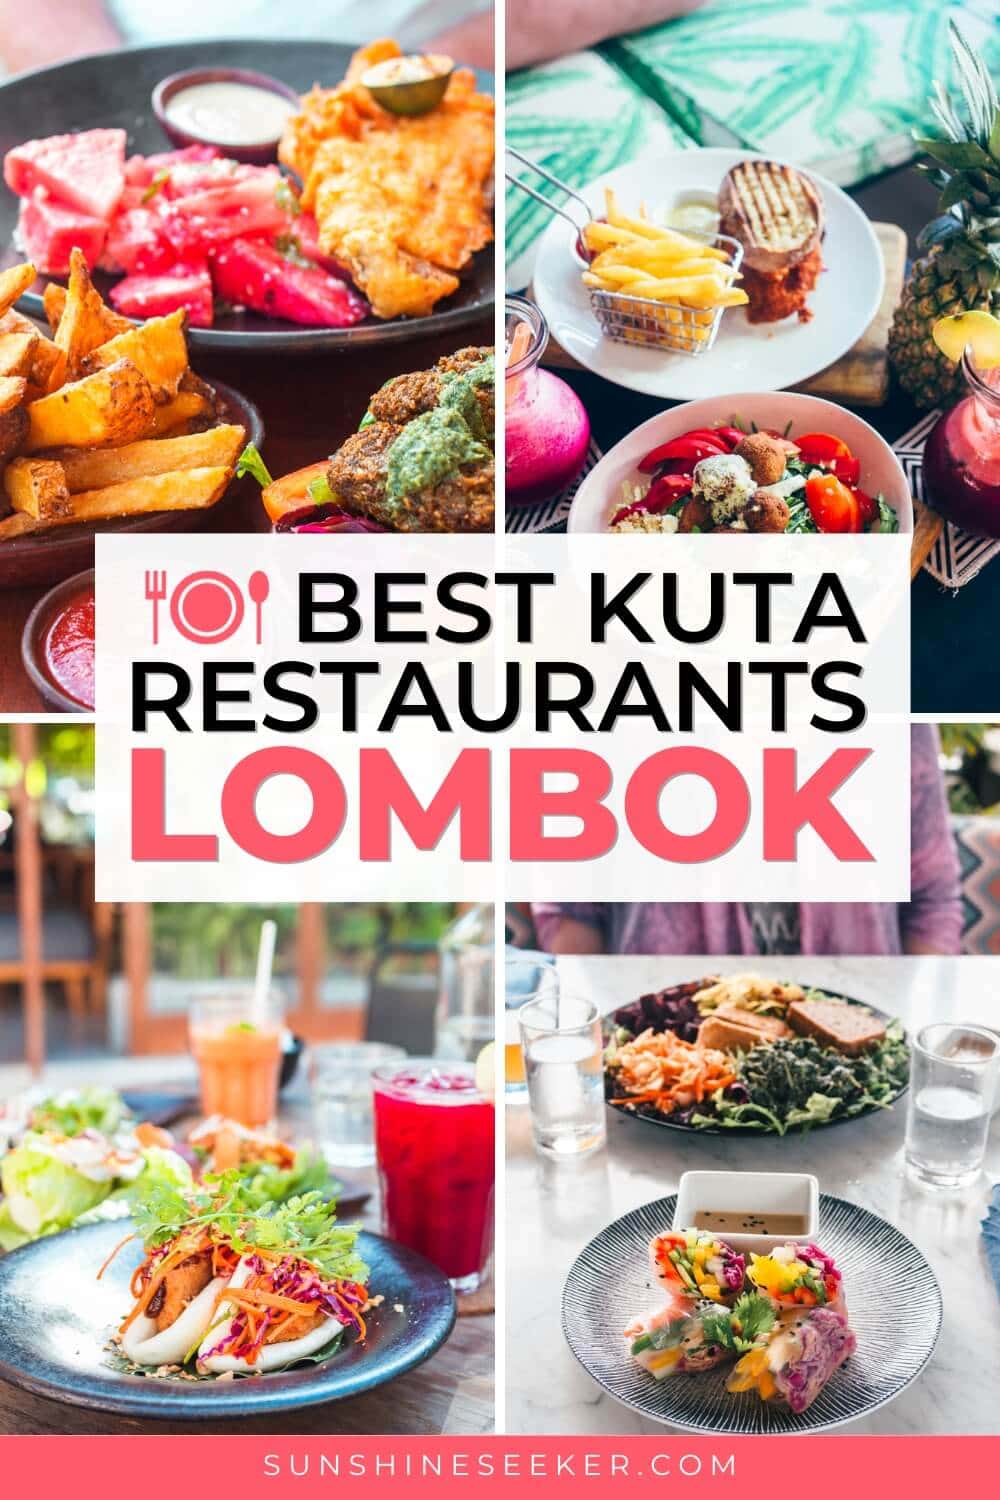 Discover the best restaurants in Kuta Lombok. Best Mexican restaurants, healthy cafes, wood fired pizza, burgers and vegan option. The only Kuta Lombok restaurant you'll ever need.